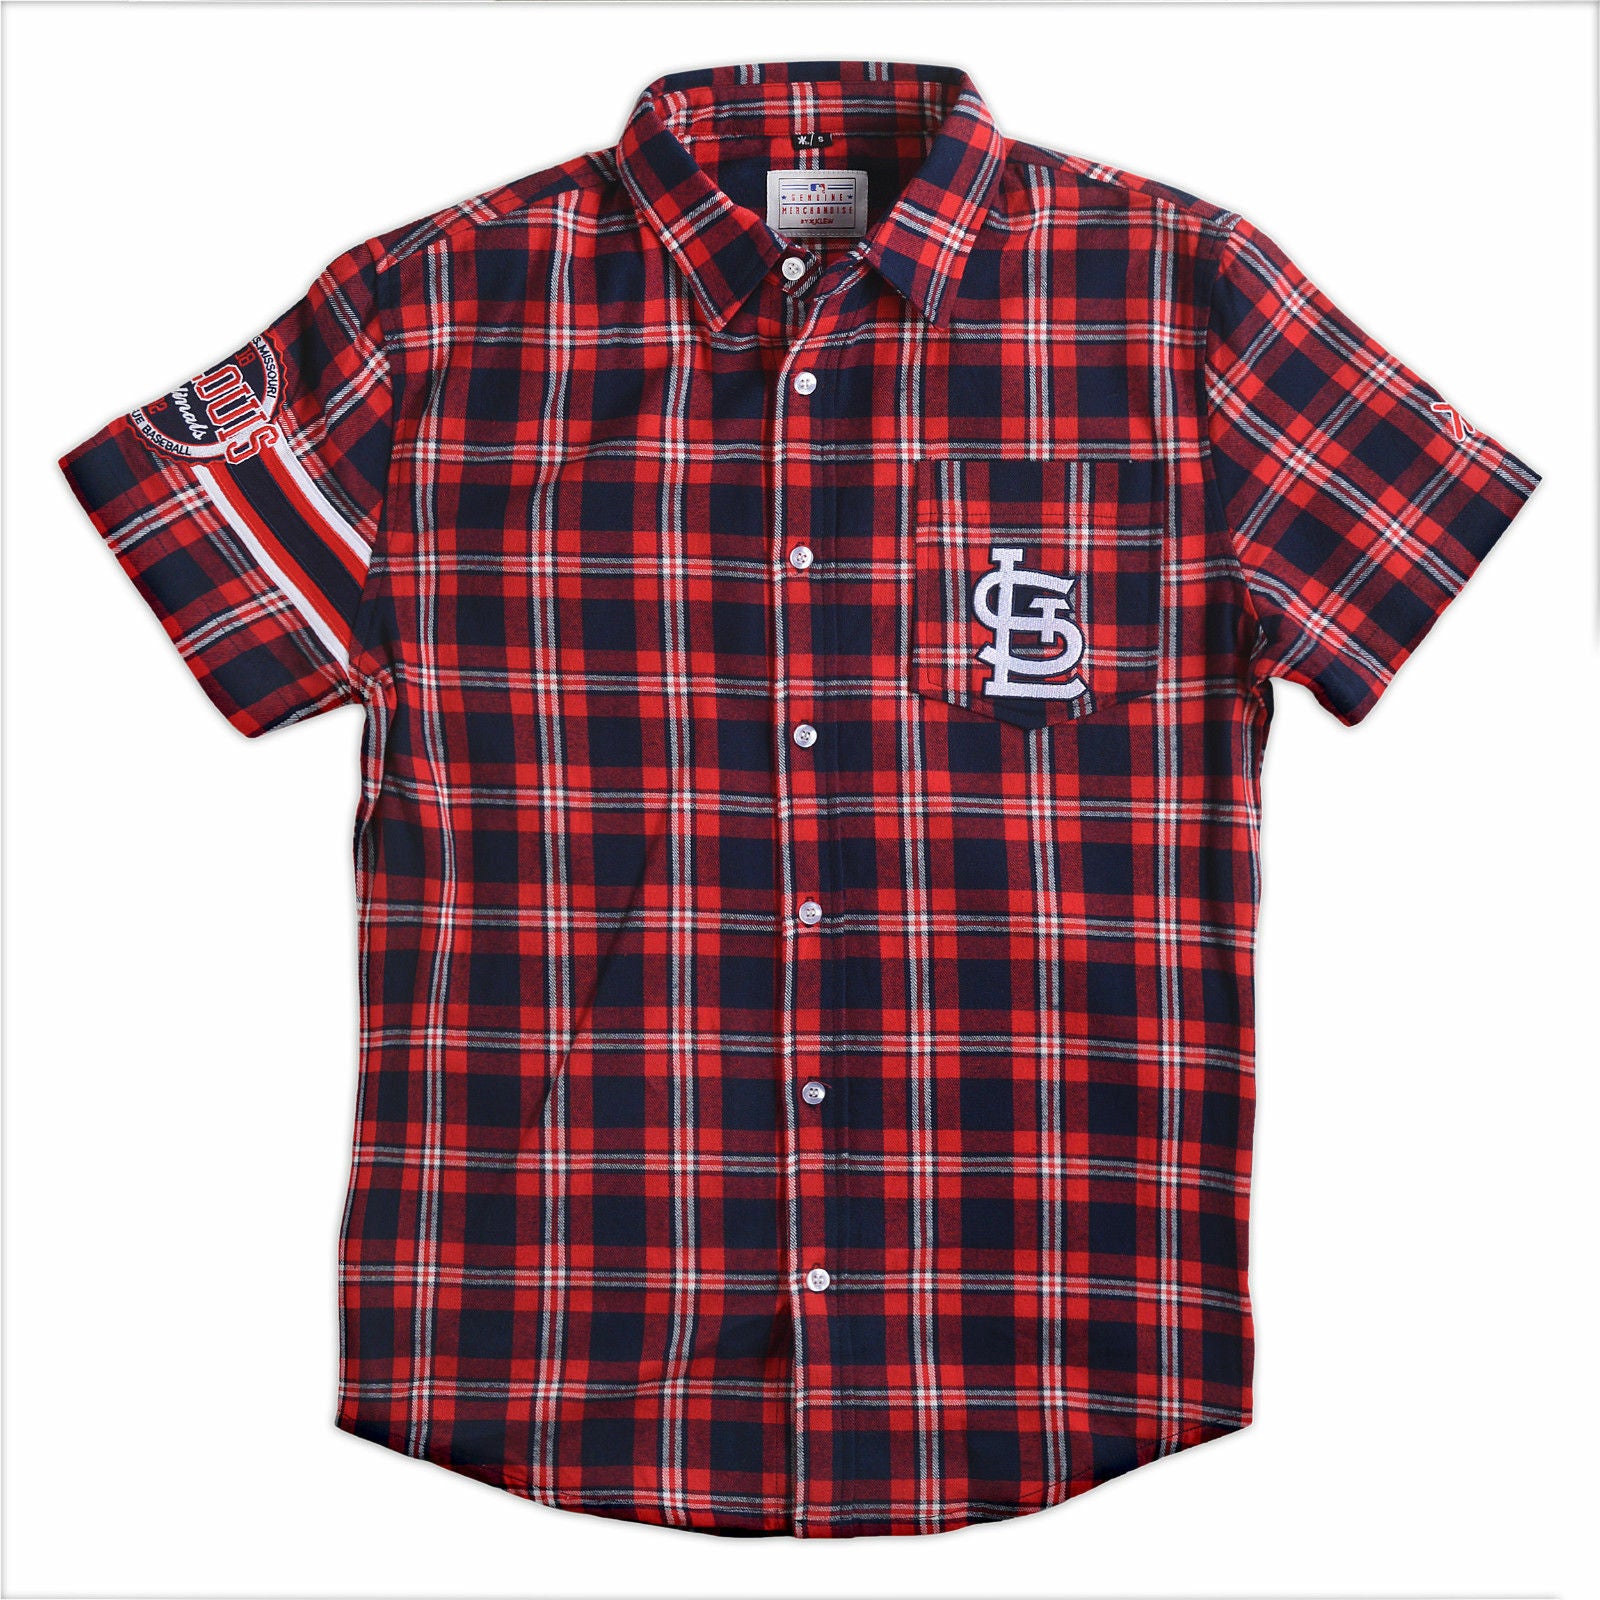 Klew MLB St. Louis Cardinals Wordmark Flannel Short Sleeve Button-Up Shirt, Red, Small